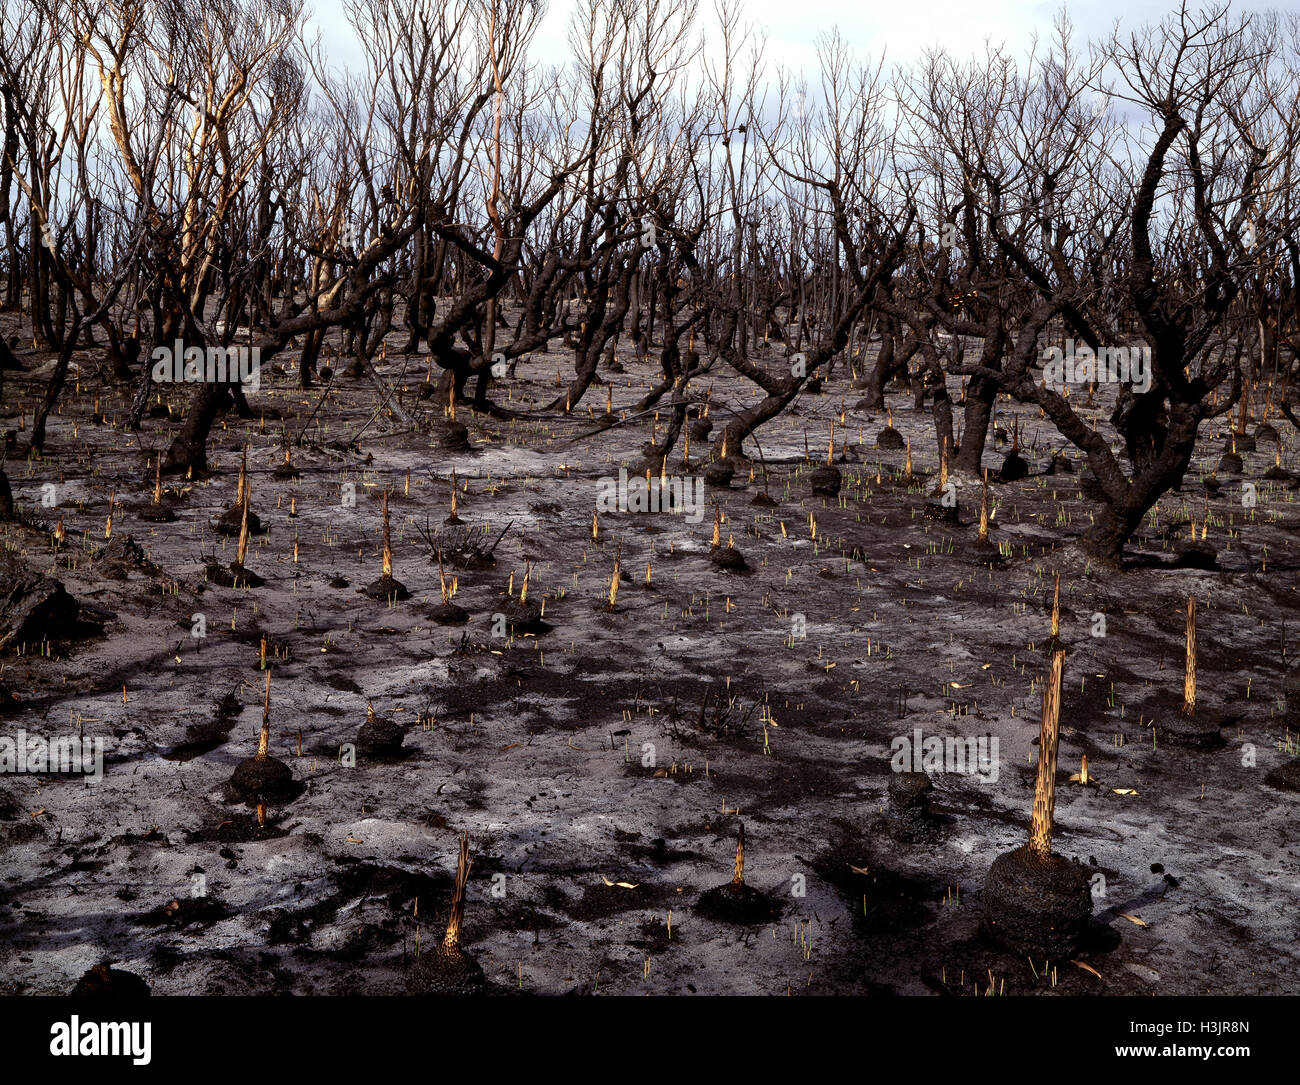 Regeneration after bushfire: four days after the fire, Stock Photo